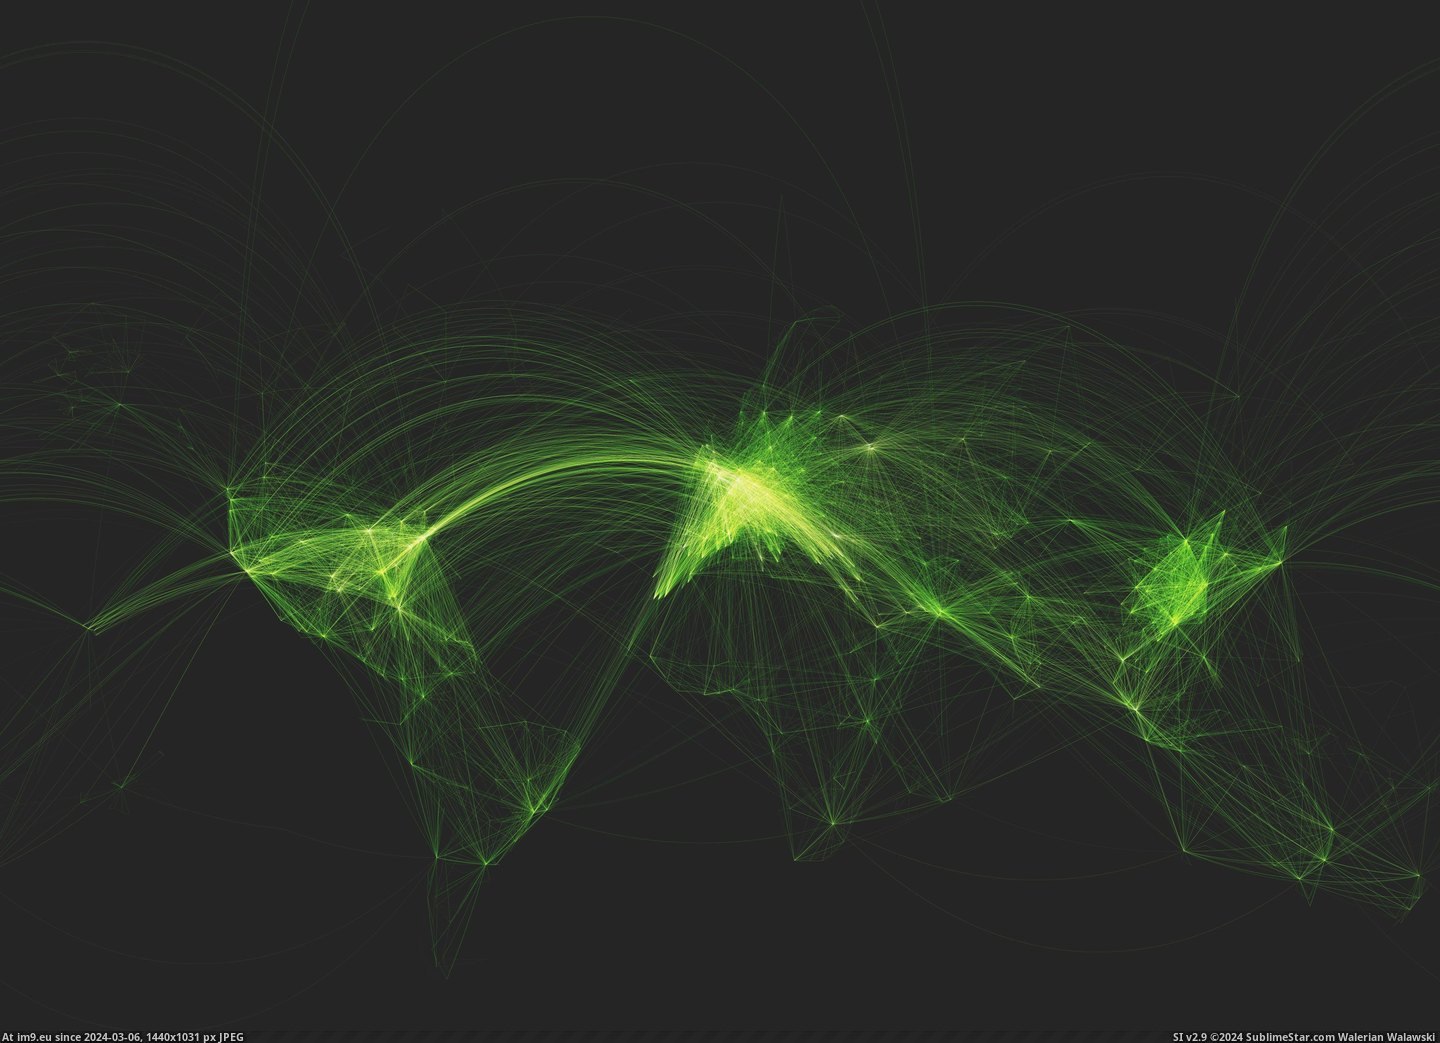 #Wallpaper #Beautiful #World #Web #Traffic #Routes #Map #Wide #Air [Mapporn] World-Wide Air Traffic Routes[4000x2875](Web-Map in comments) Pic. (Image of album My r/MAPS favs))